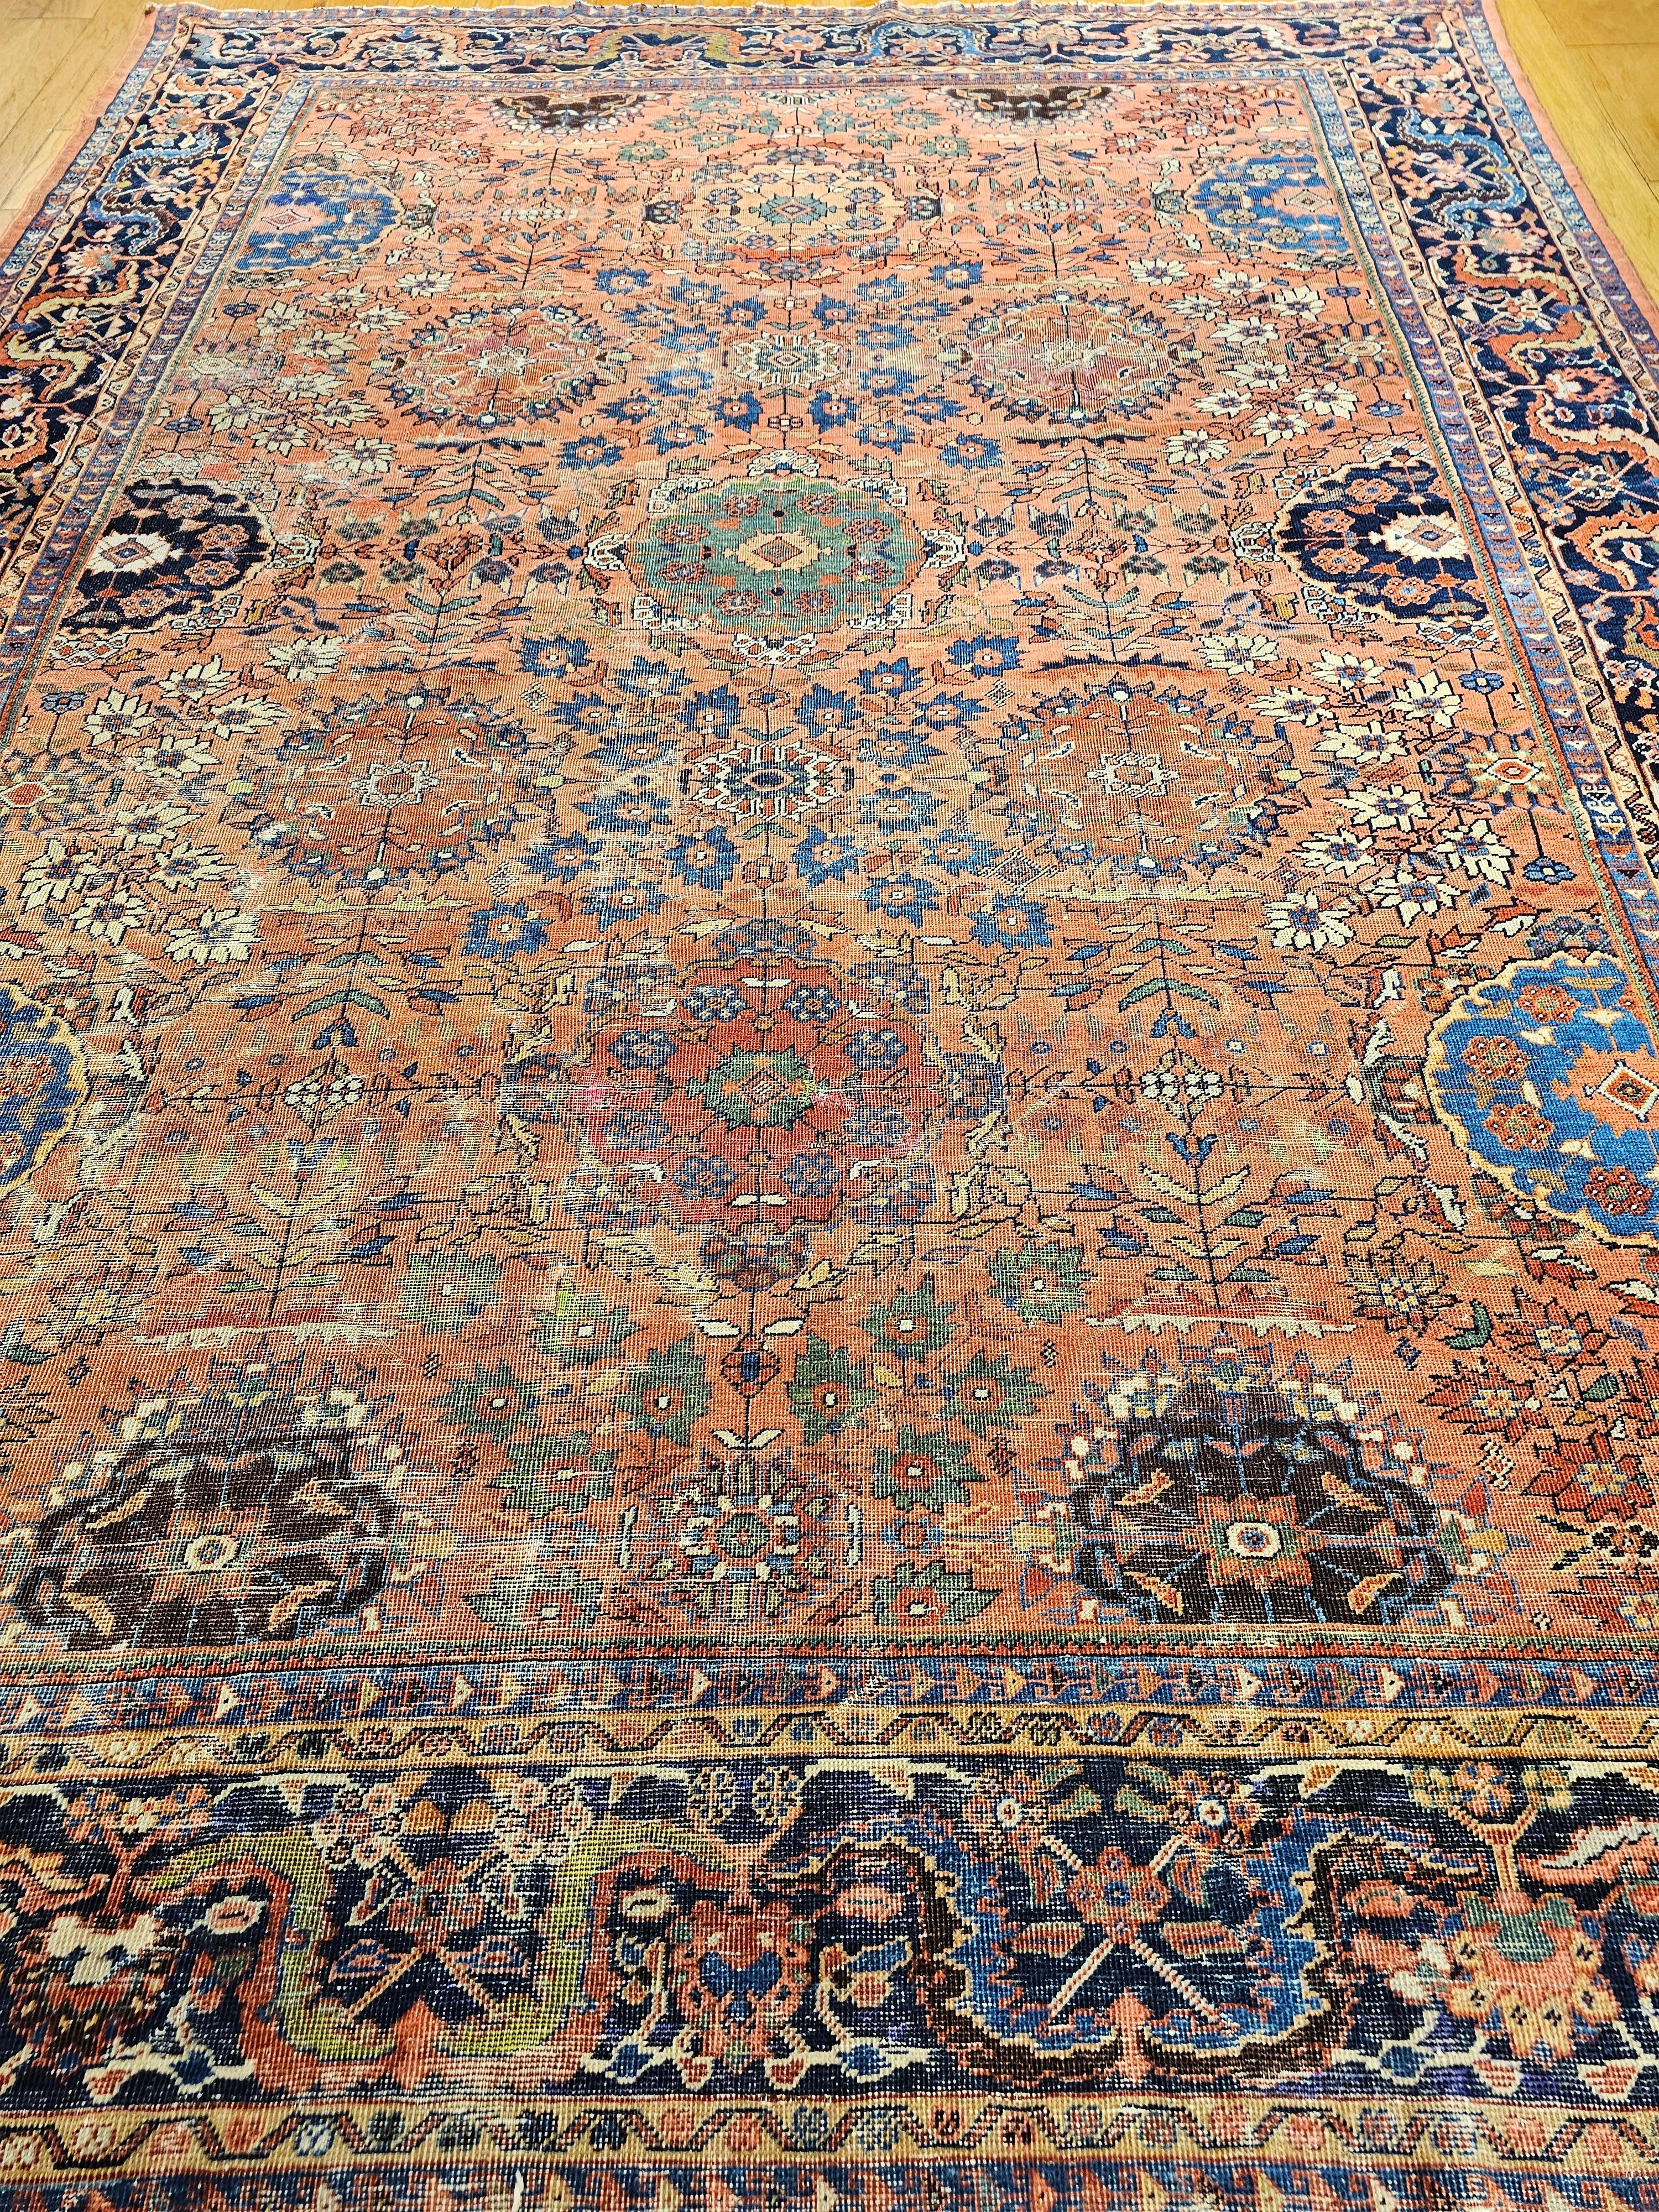 Vintage Persian Mahal Sultanabad Room Size Rug in Brick Red, Navy Blue 11